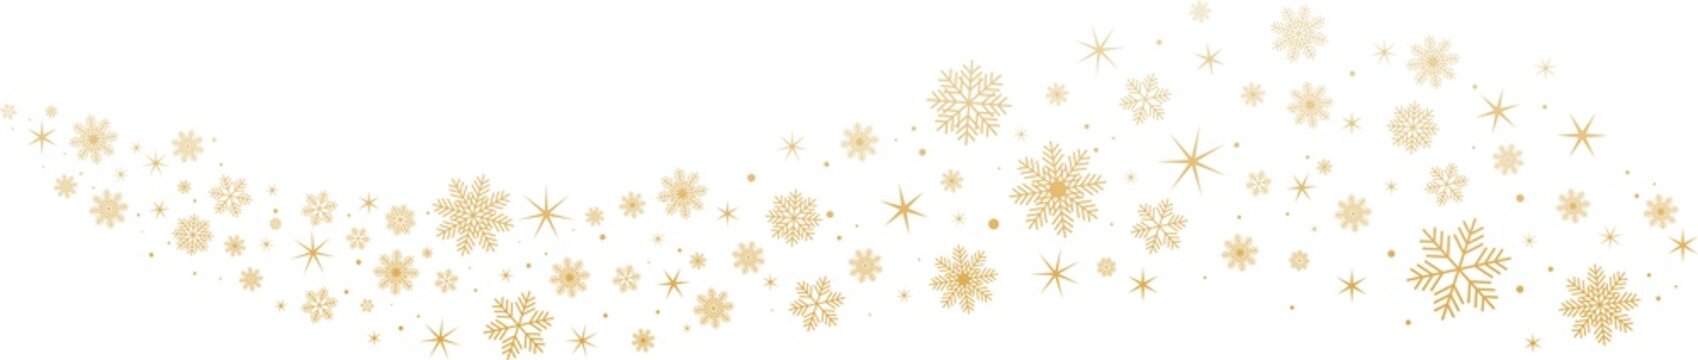 Gold snowflakes and stars on transparent background. New year illustration. PNG image